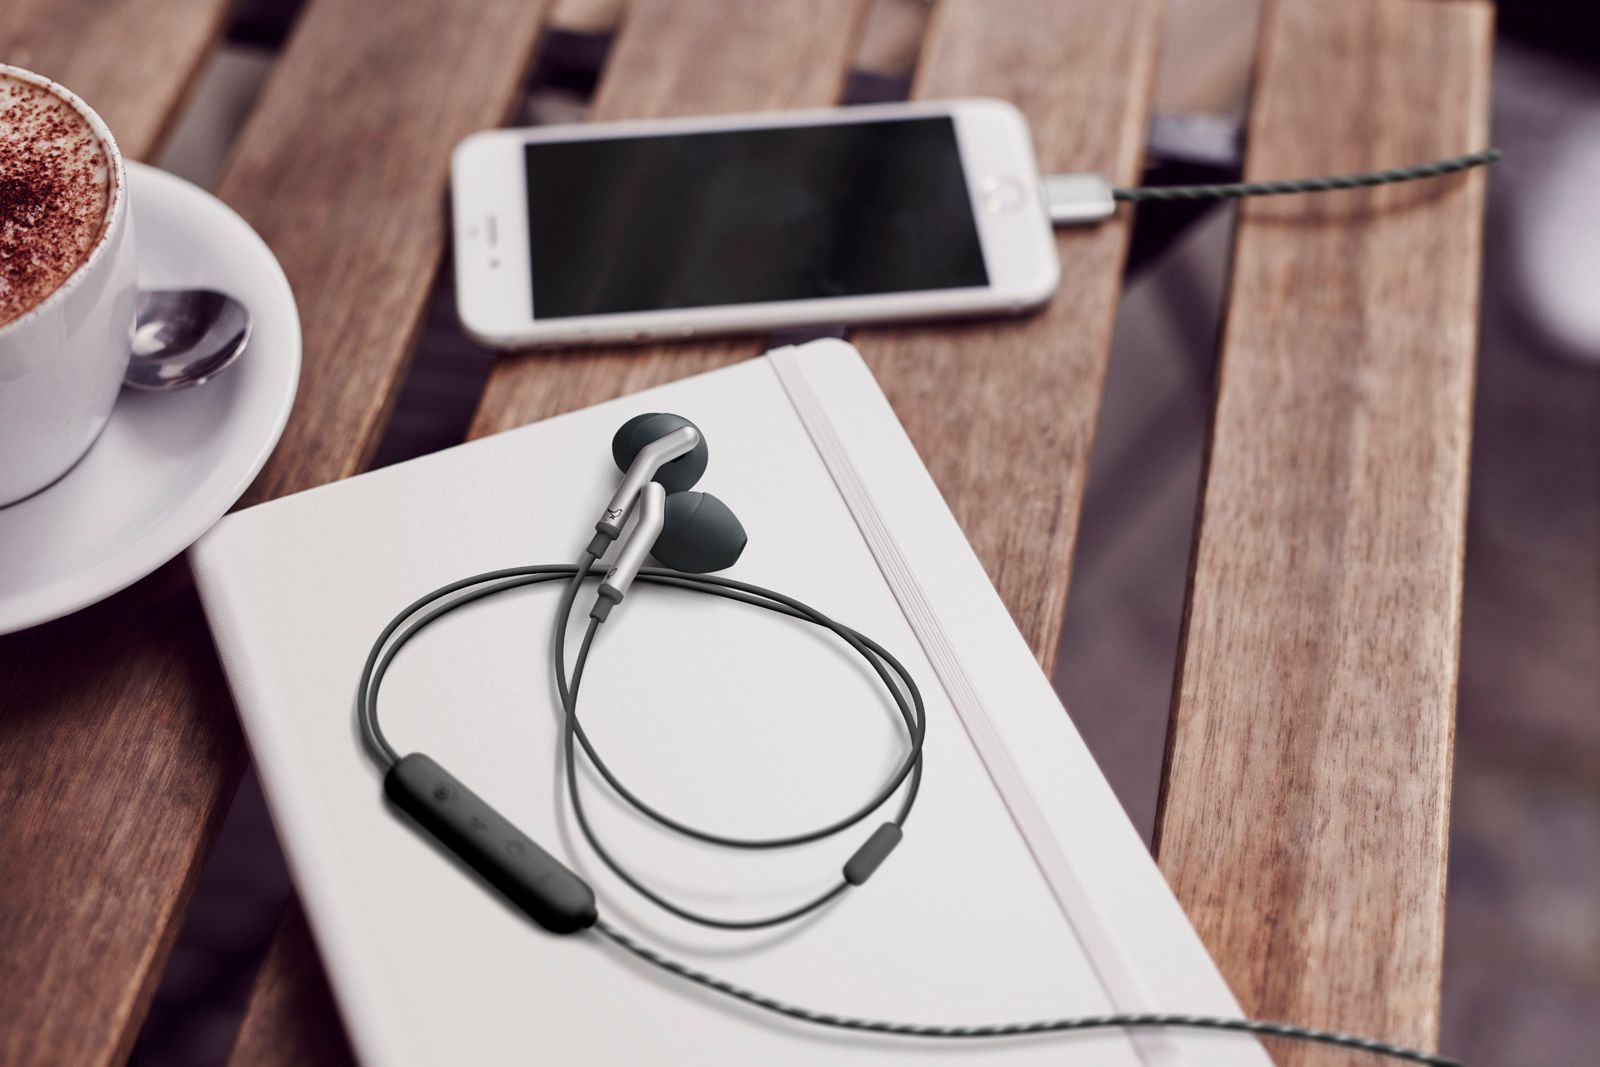 Got An Iphone Or Ipad Check Out The Q Adapt In-ear Headphones By Libratone image 1